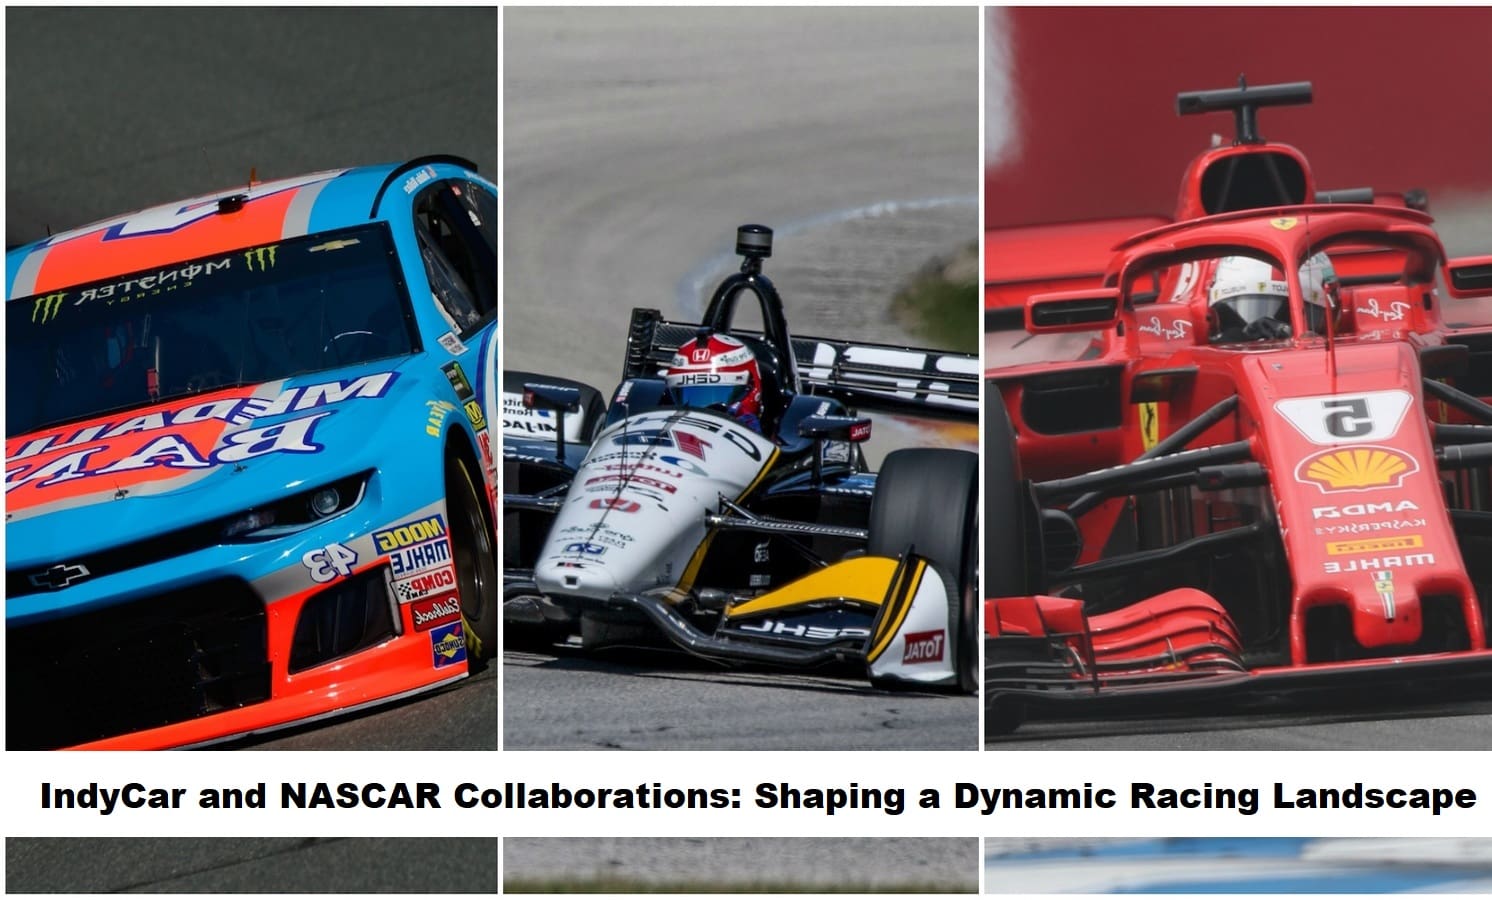 indycar-and-nascar-collaborations-shaping-a-dynamic-racing-landscap